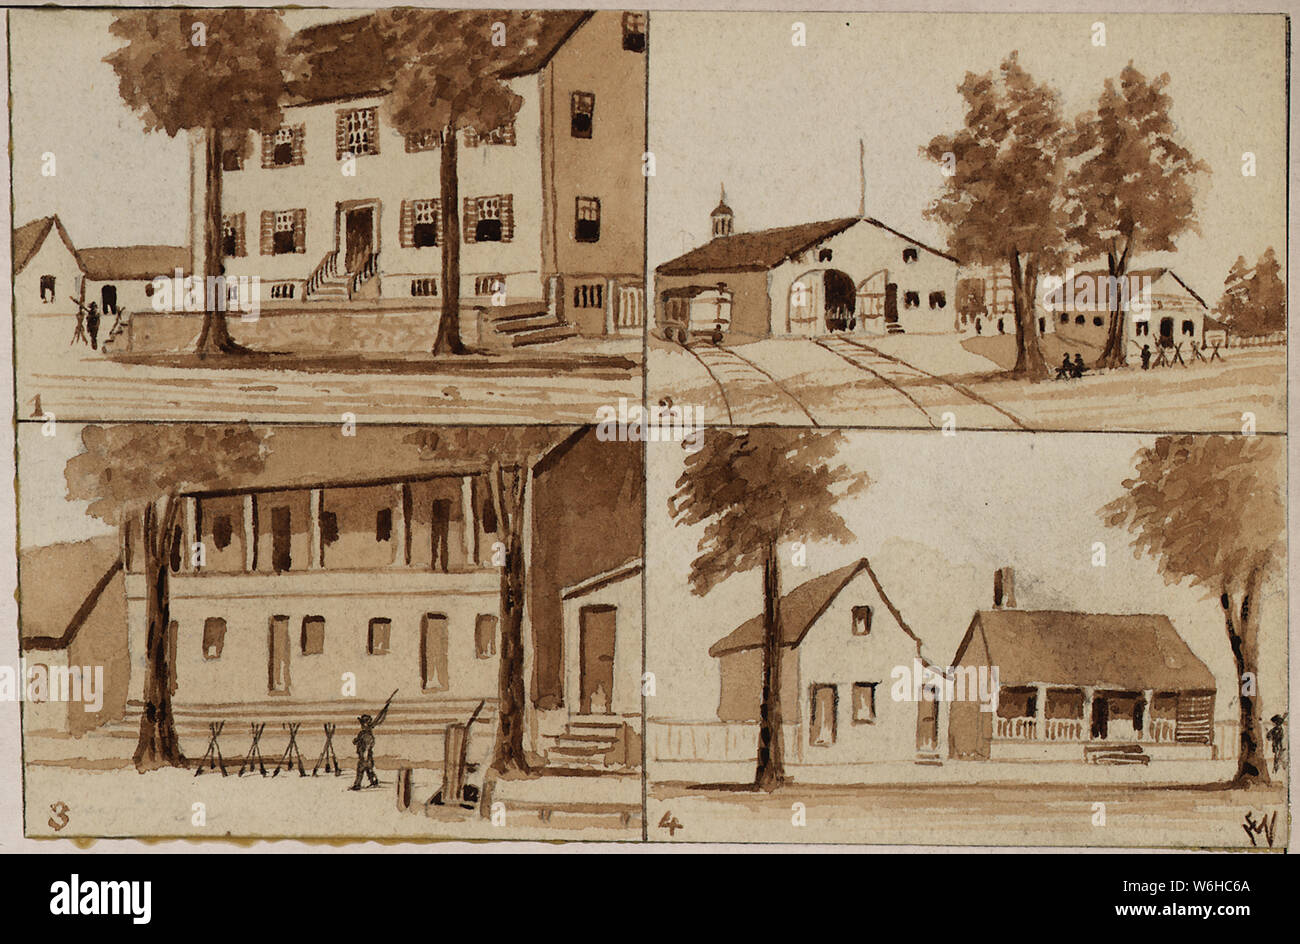 Guardhouses of the 23rd Massachusetts Volunteer Infantry, New Berne, N. Carolina, May 8 - November 22, 1862. (Four individual sketches) (1)-First District Provost Marshal's Headquarters and guardhouse (2)-Second District guardhouse near the railroad station (3)-Third District guardhouse (4)-One of the guardposts in the Third District where a sentry was assaulted., 05/08/1862 - 11/22/1862 Stock Photo